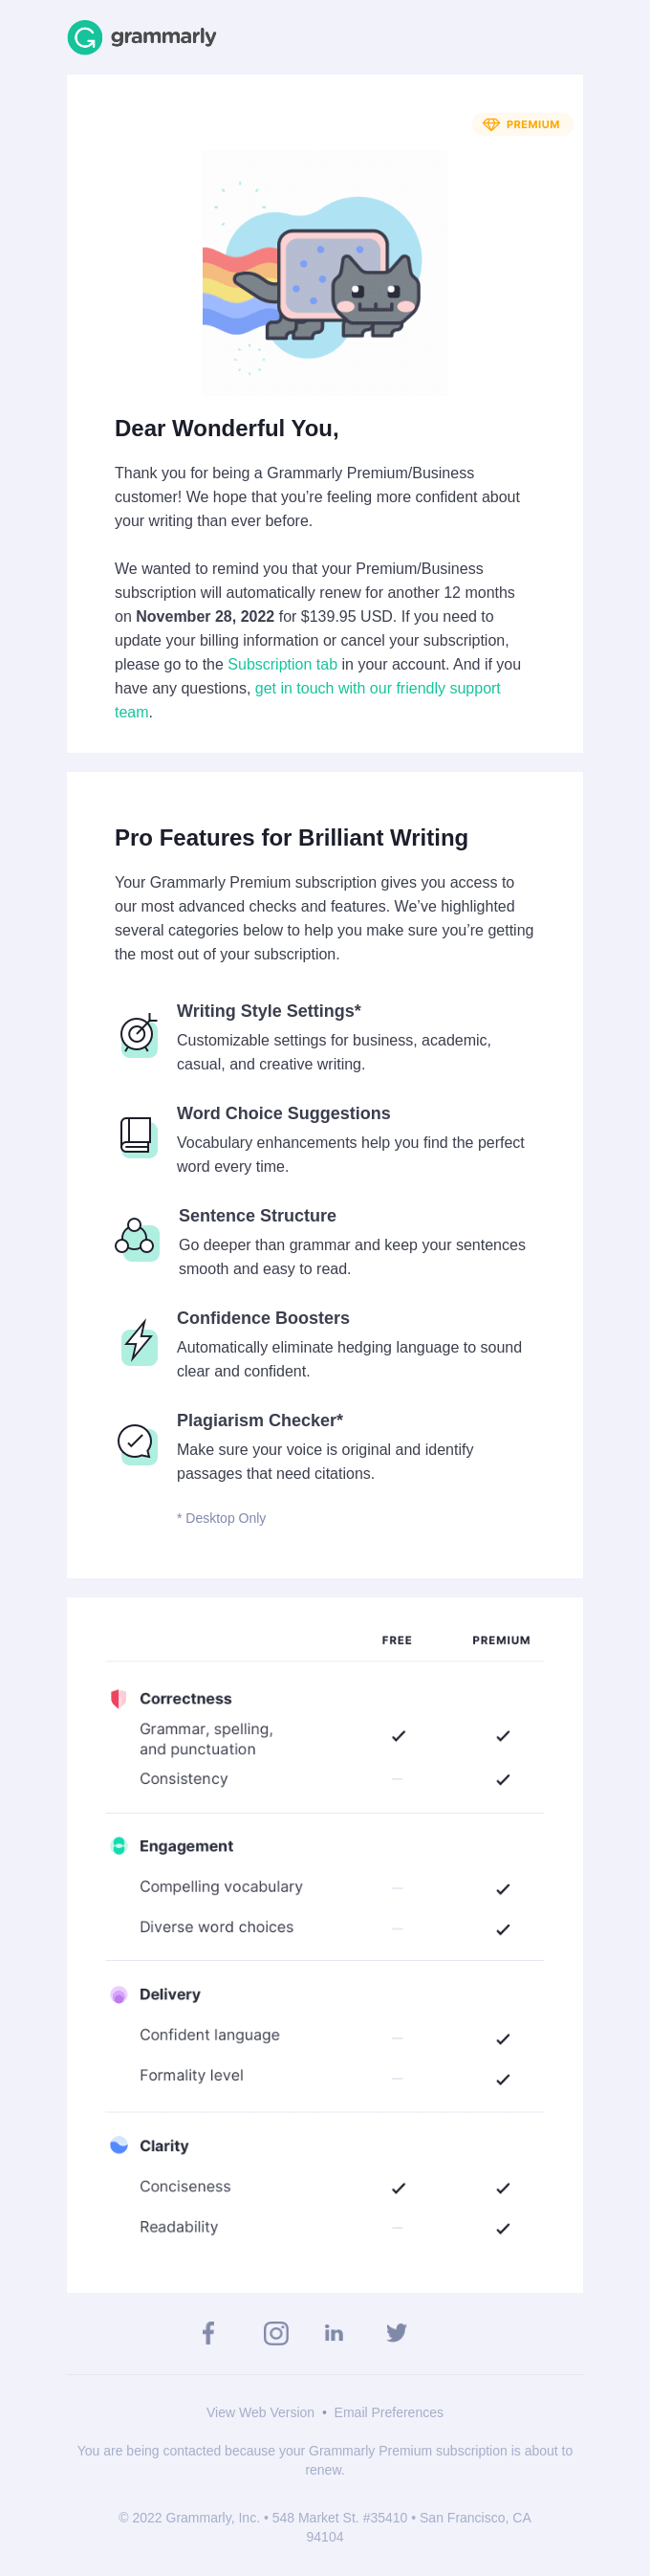 Subscription renewal reminder email from Grammarly that lists Premium features, appreciates customers for choosing their paid plan, and reminds them about the price and the automated money withdrawal